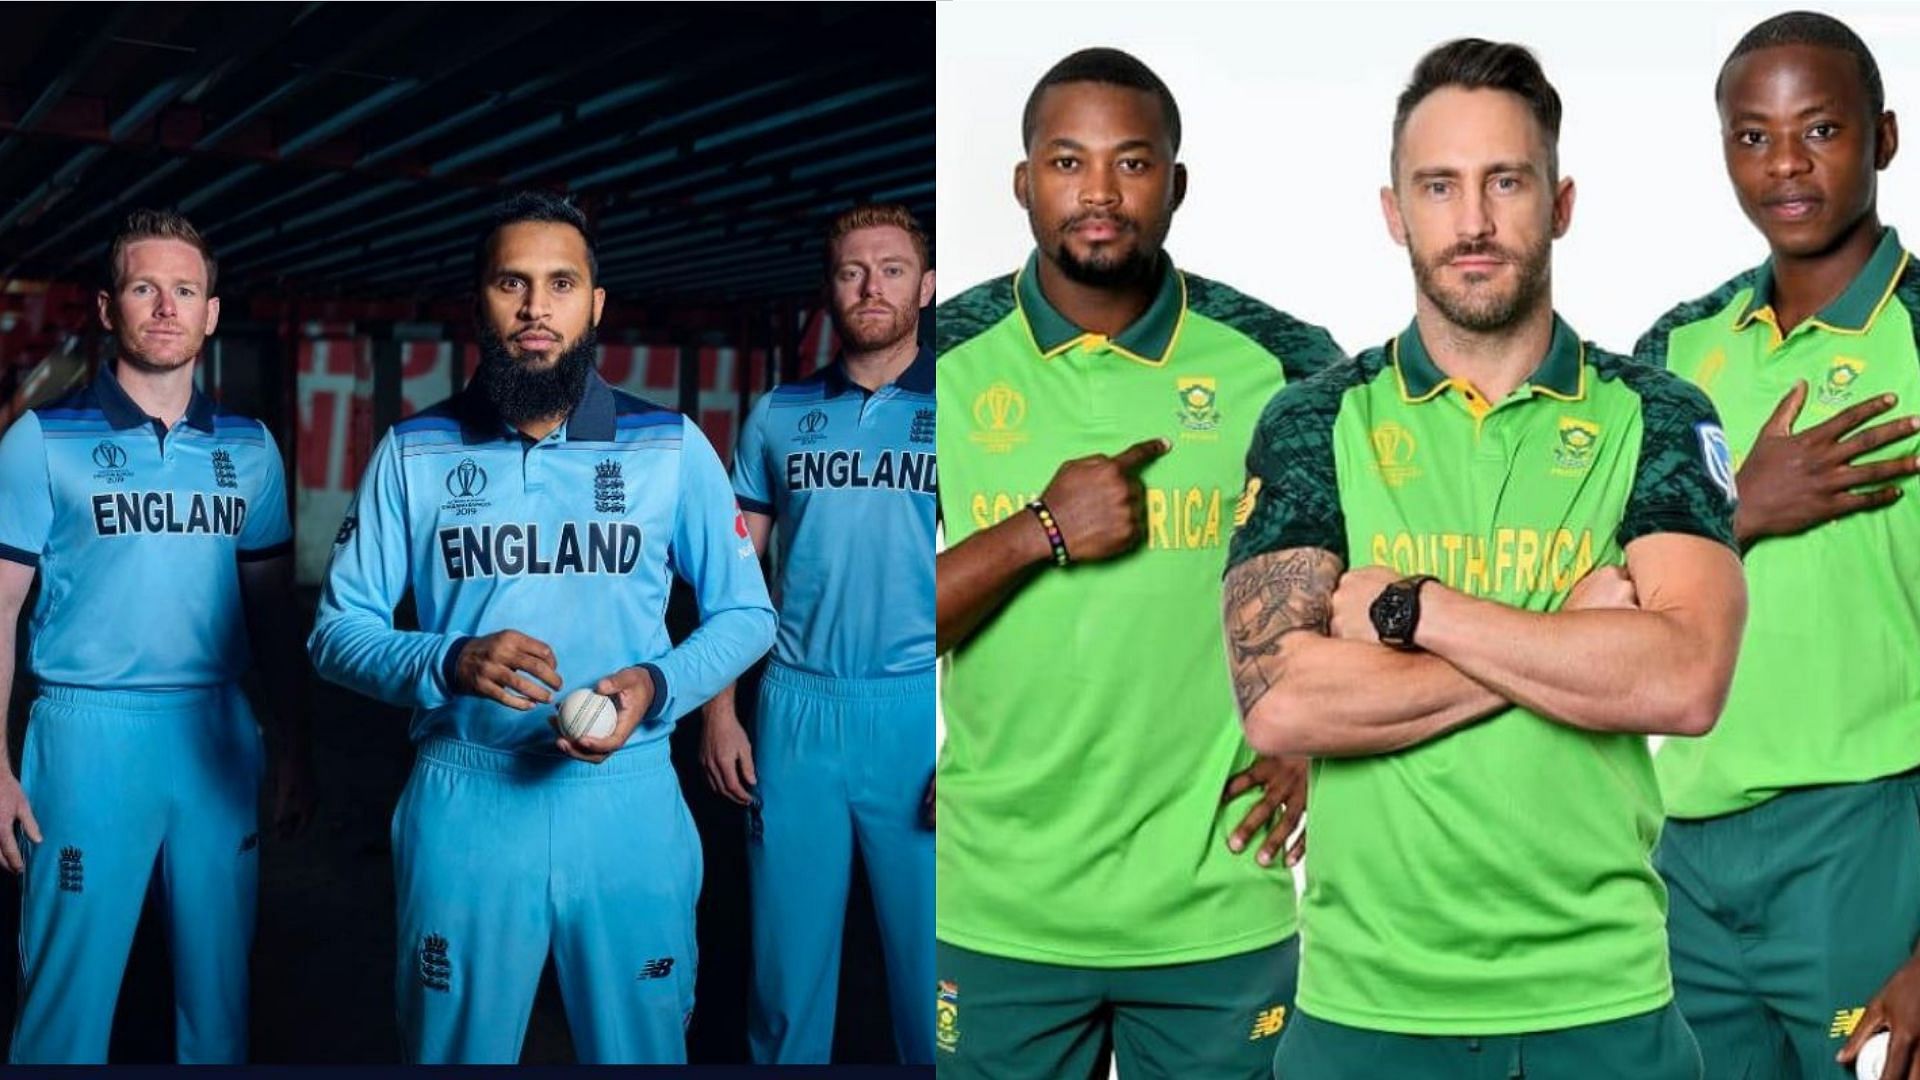 Eng vs SA Live Streaming Online: The hosts will face a stern test against the mighty Proteas at The Oval